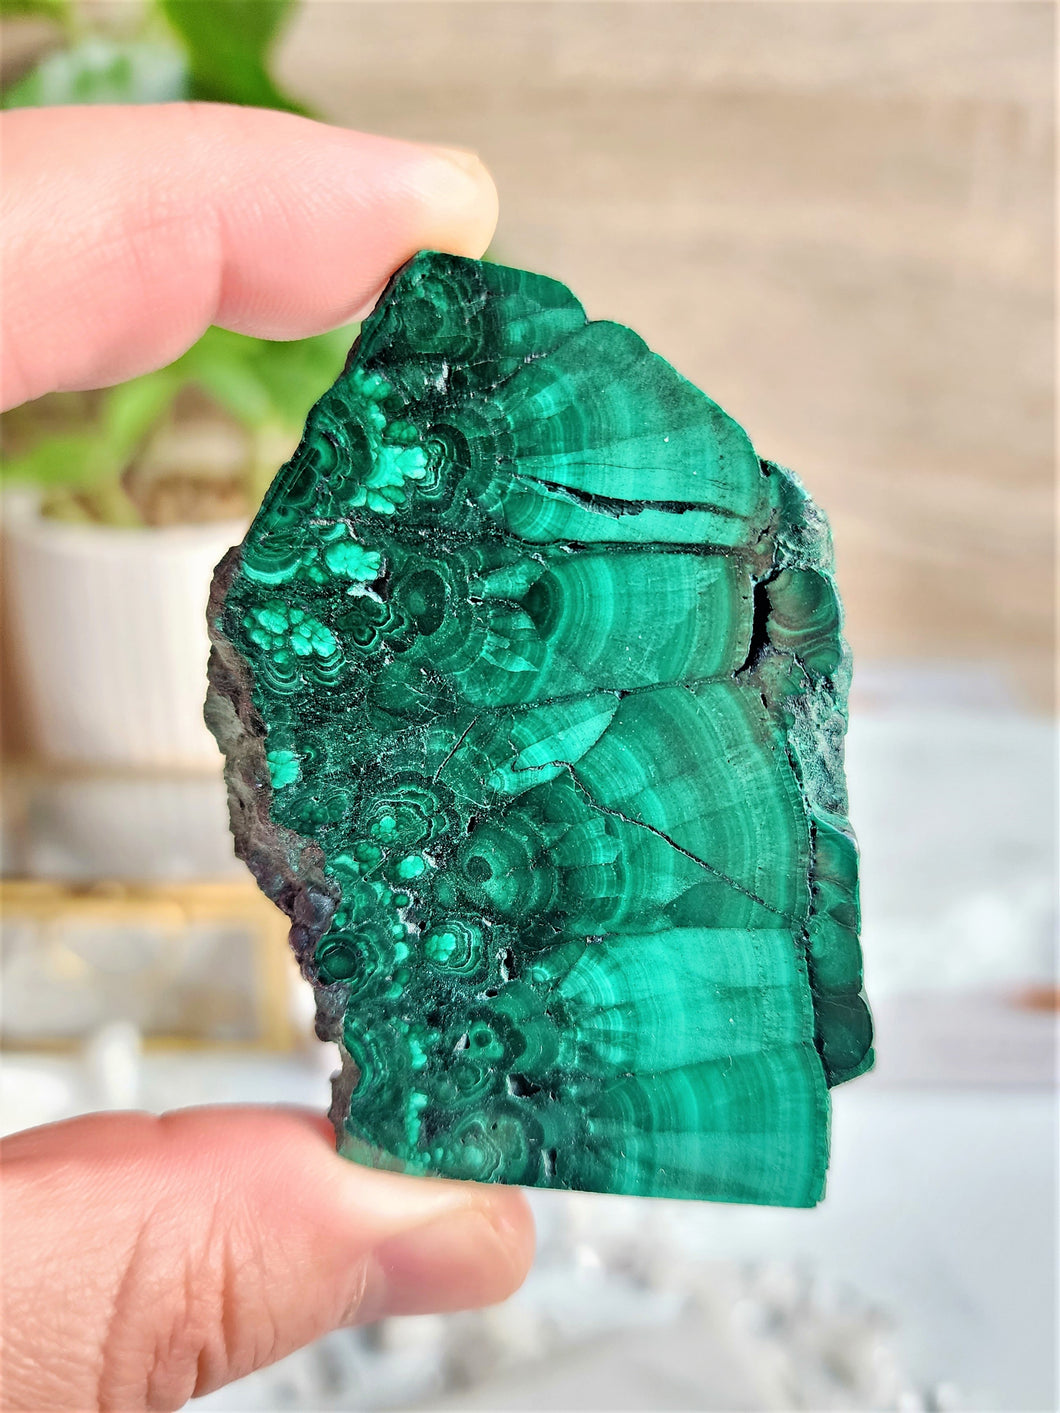 Malachite is believed to possess powerful spiritual properties that can aid in emotional healing, transformation, and protection, while also enhancing intuition and promoting spiritual growth.